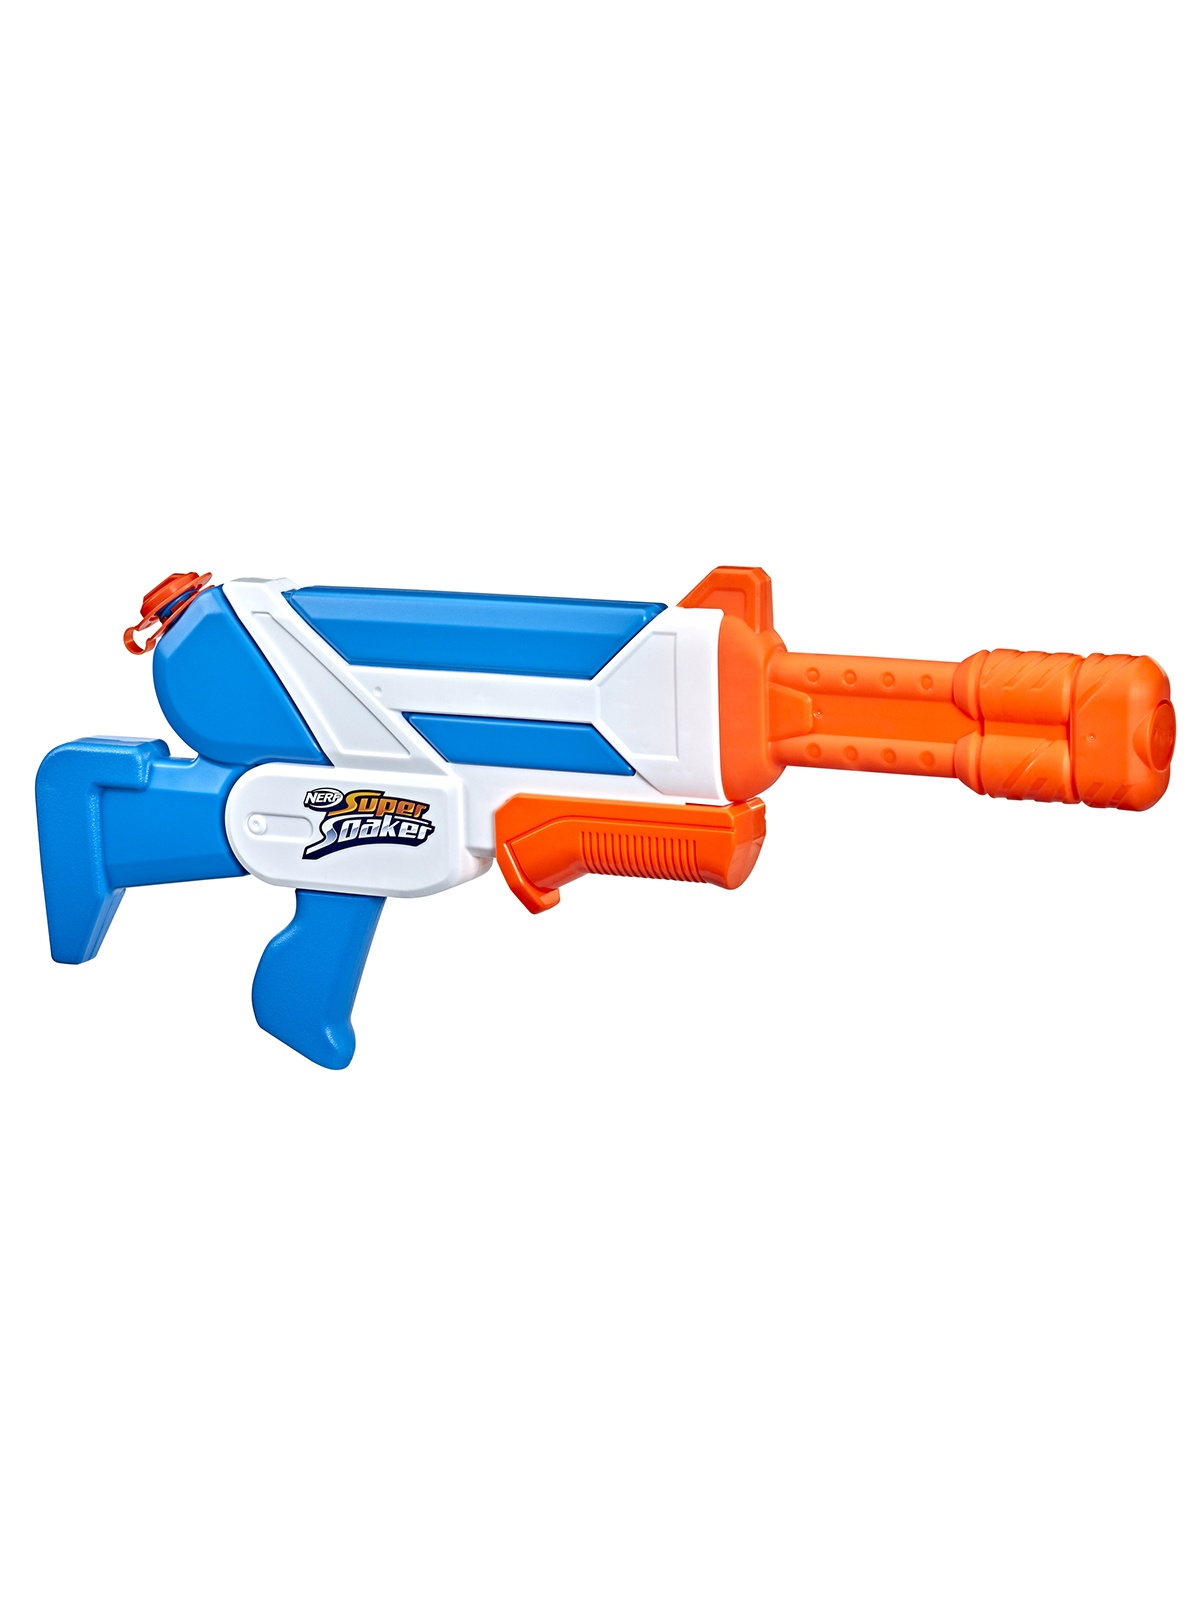 NERF SUPERSOAKER